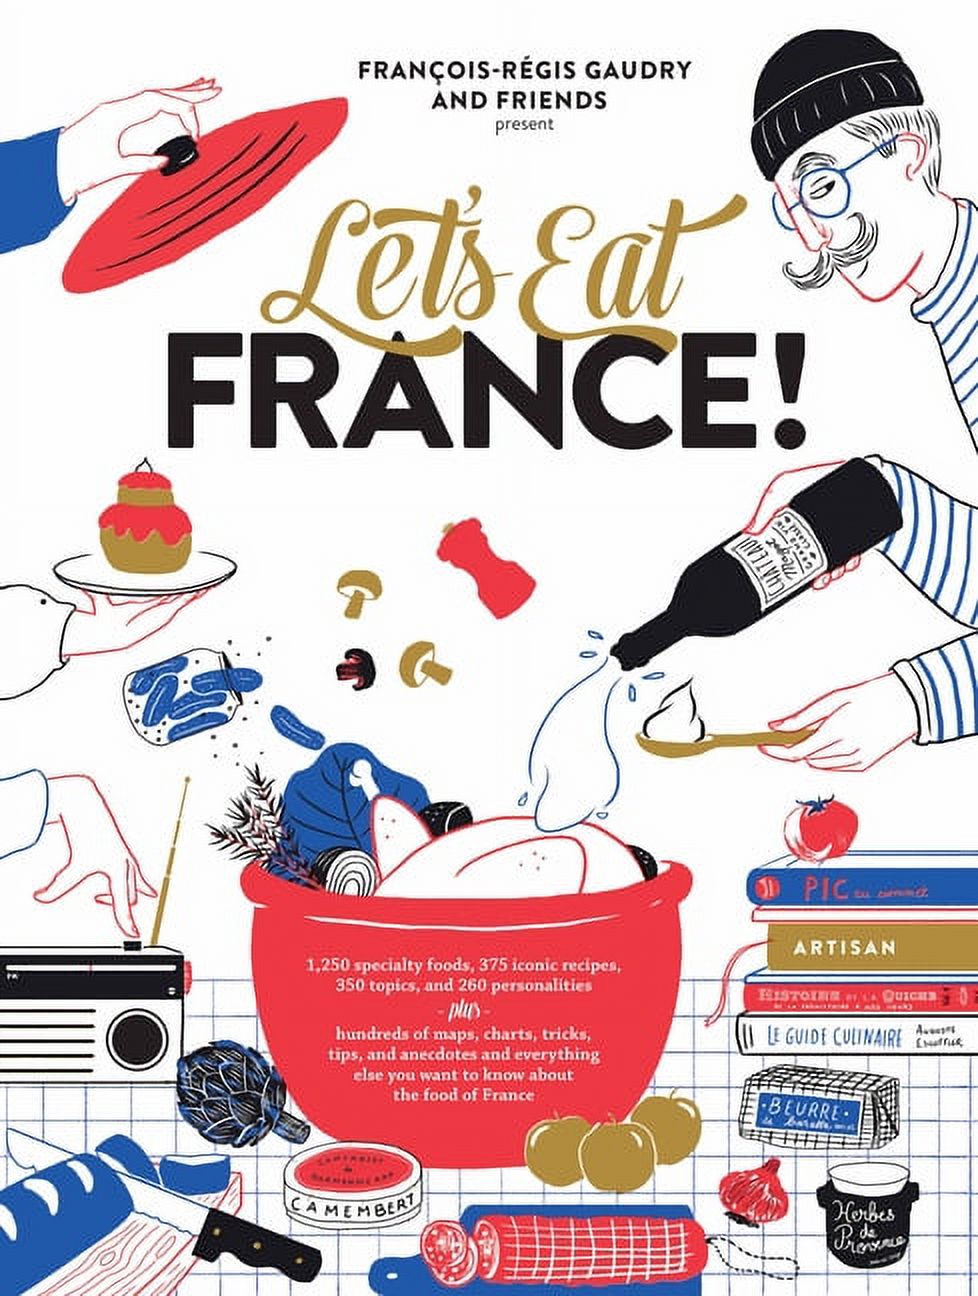 Let's Eat Series: Let's Eat France! : 1,250 specialty foods, 375 iconic recipes, 350 topics, 260 personalities, plus hundreds of maps, charts, tricks, tips, and anecdotes and everything else you want to know about the food of France (Series #1) (Hardcover) - image 1 of 1